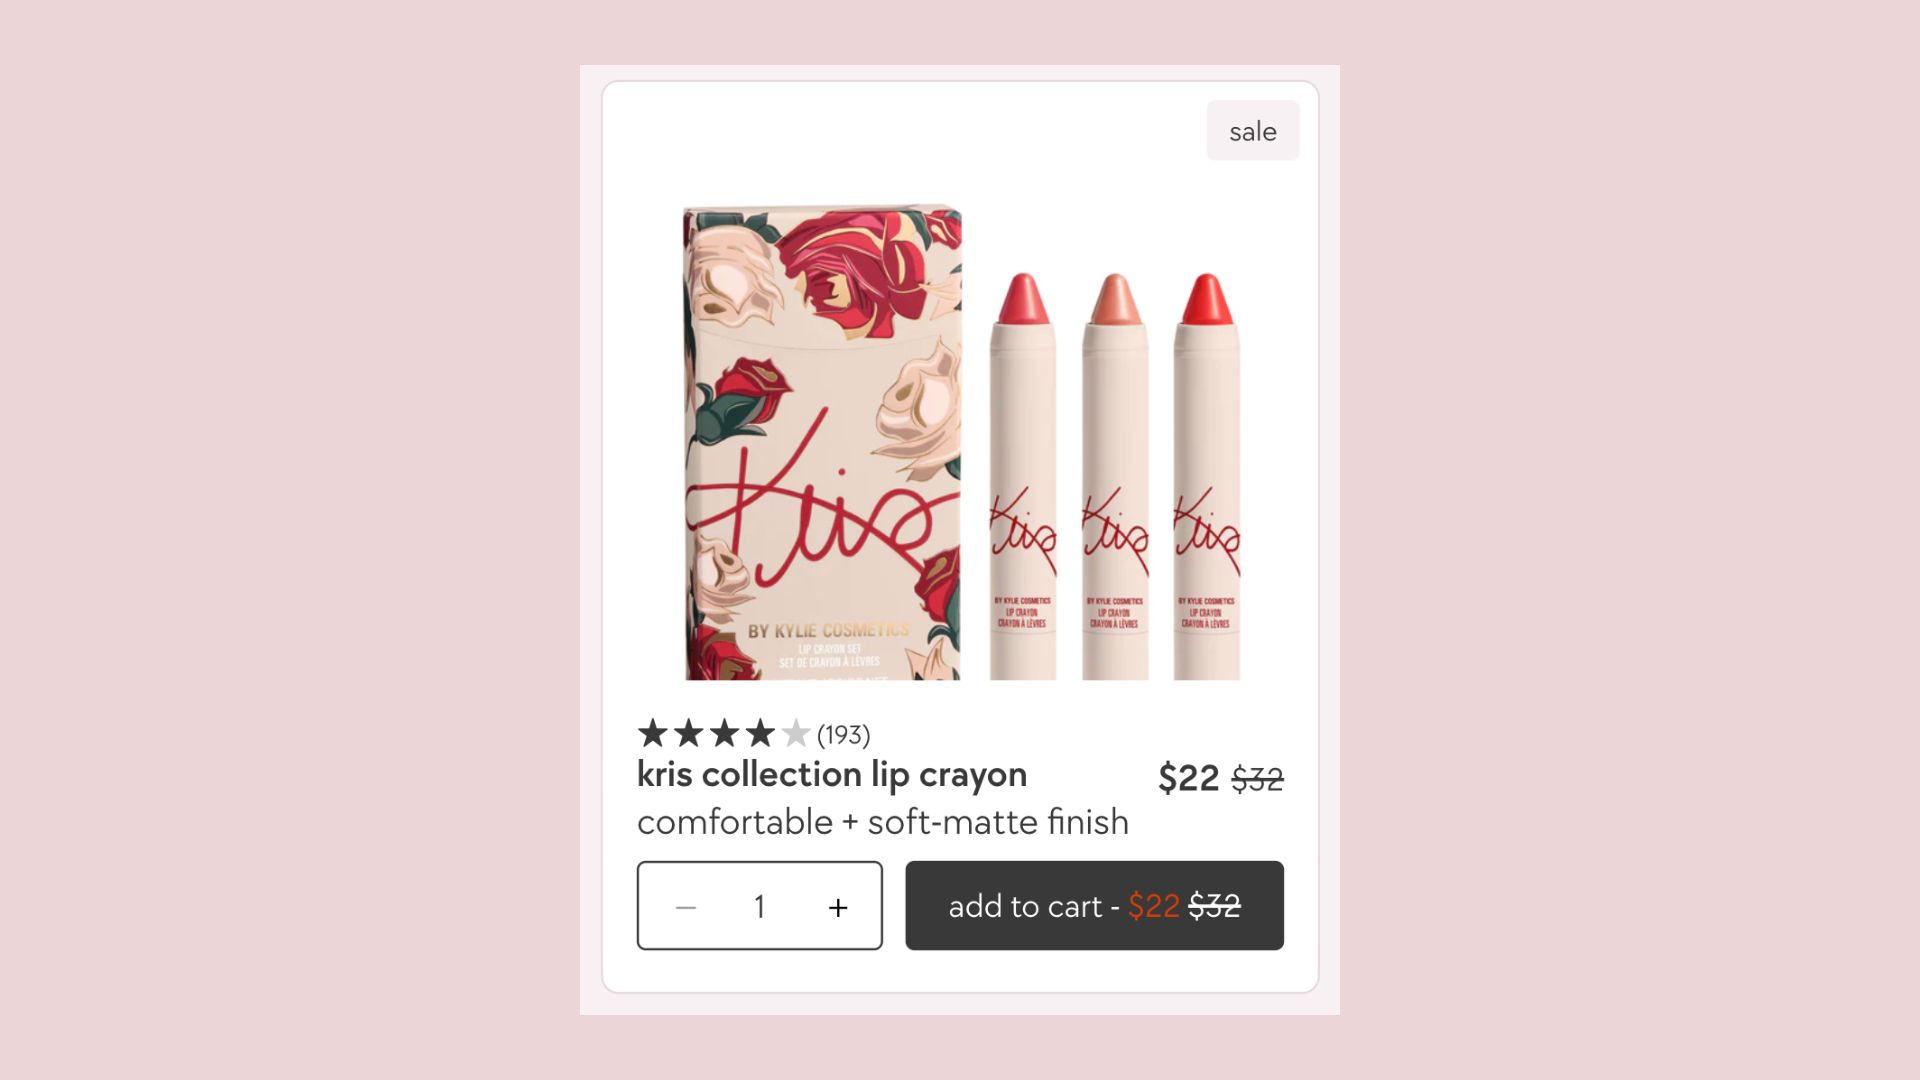 Compare at pricing done on kris collection lip crayon